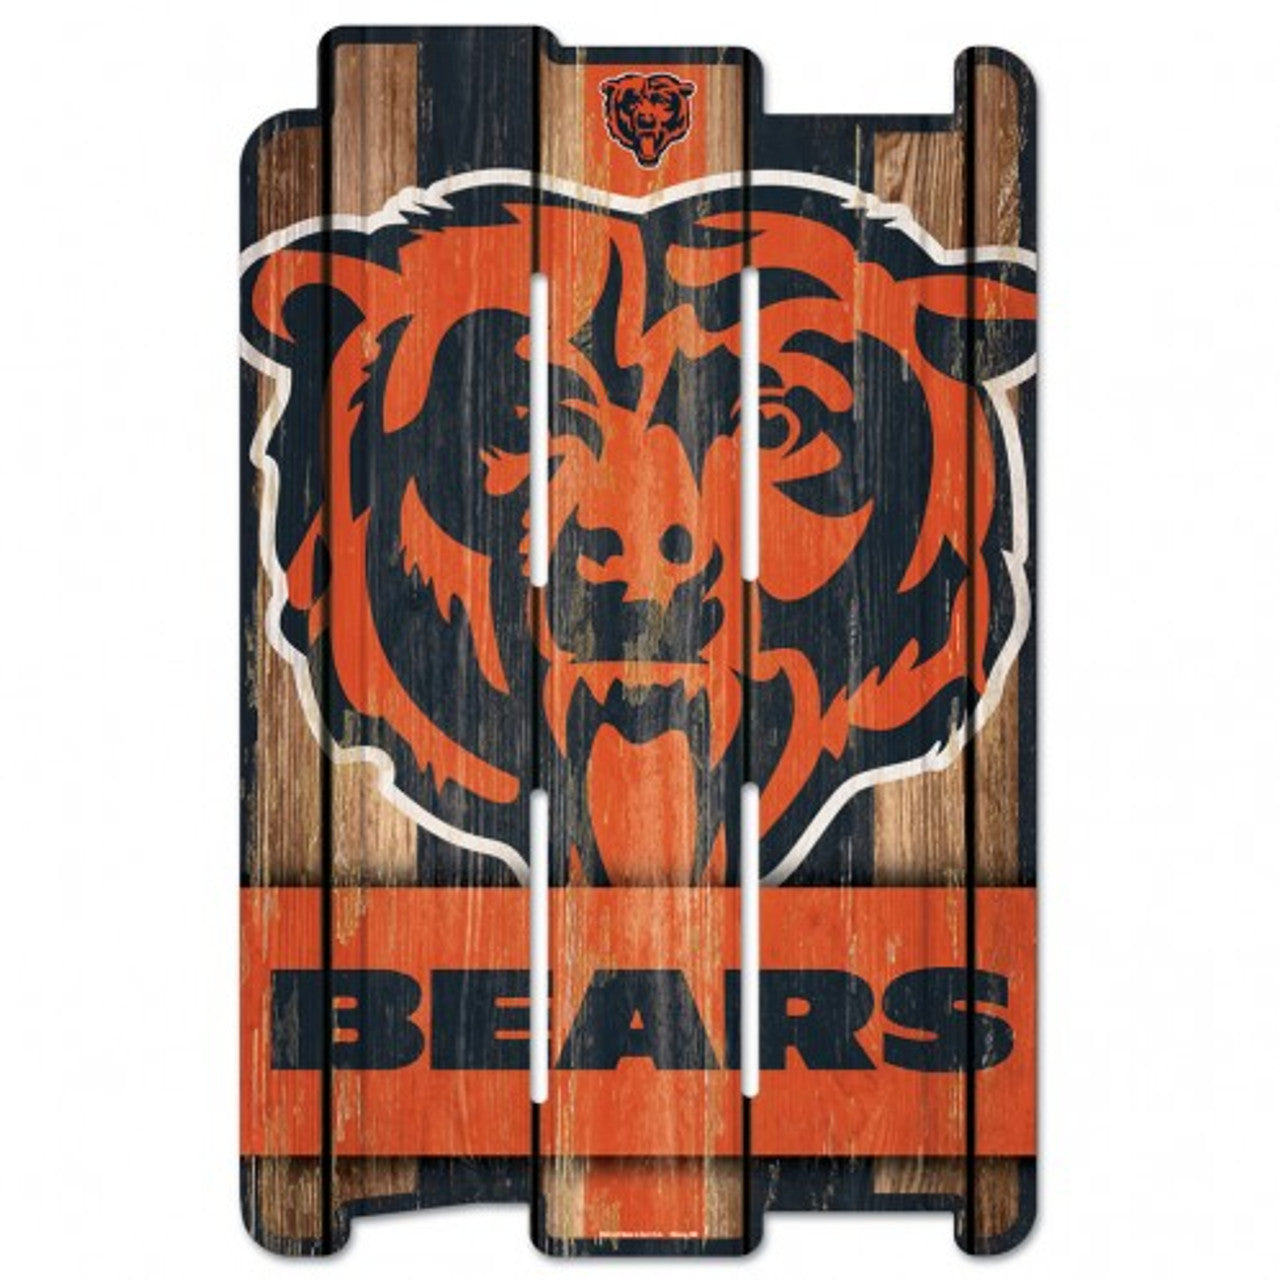 Chicago Bears 11" x 17" Wood Fence Sign by Wincraft